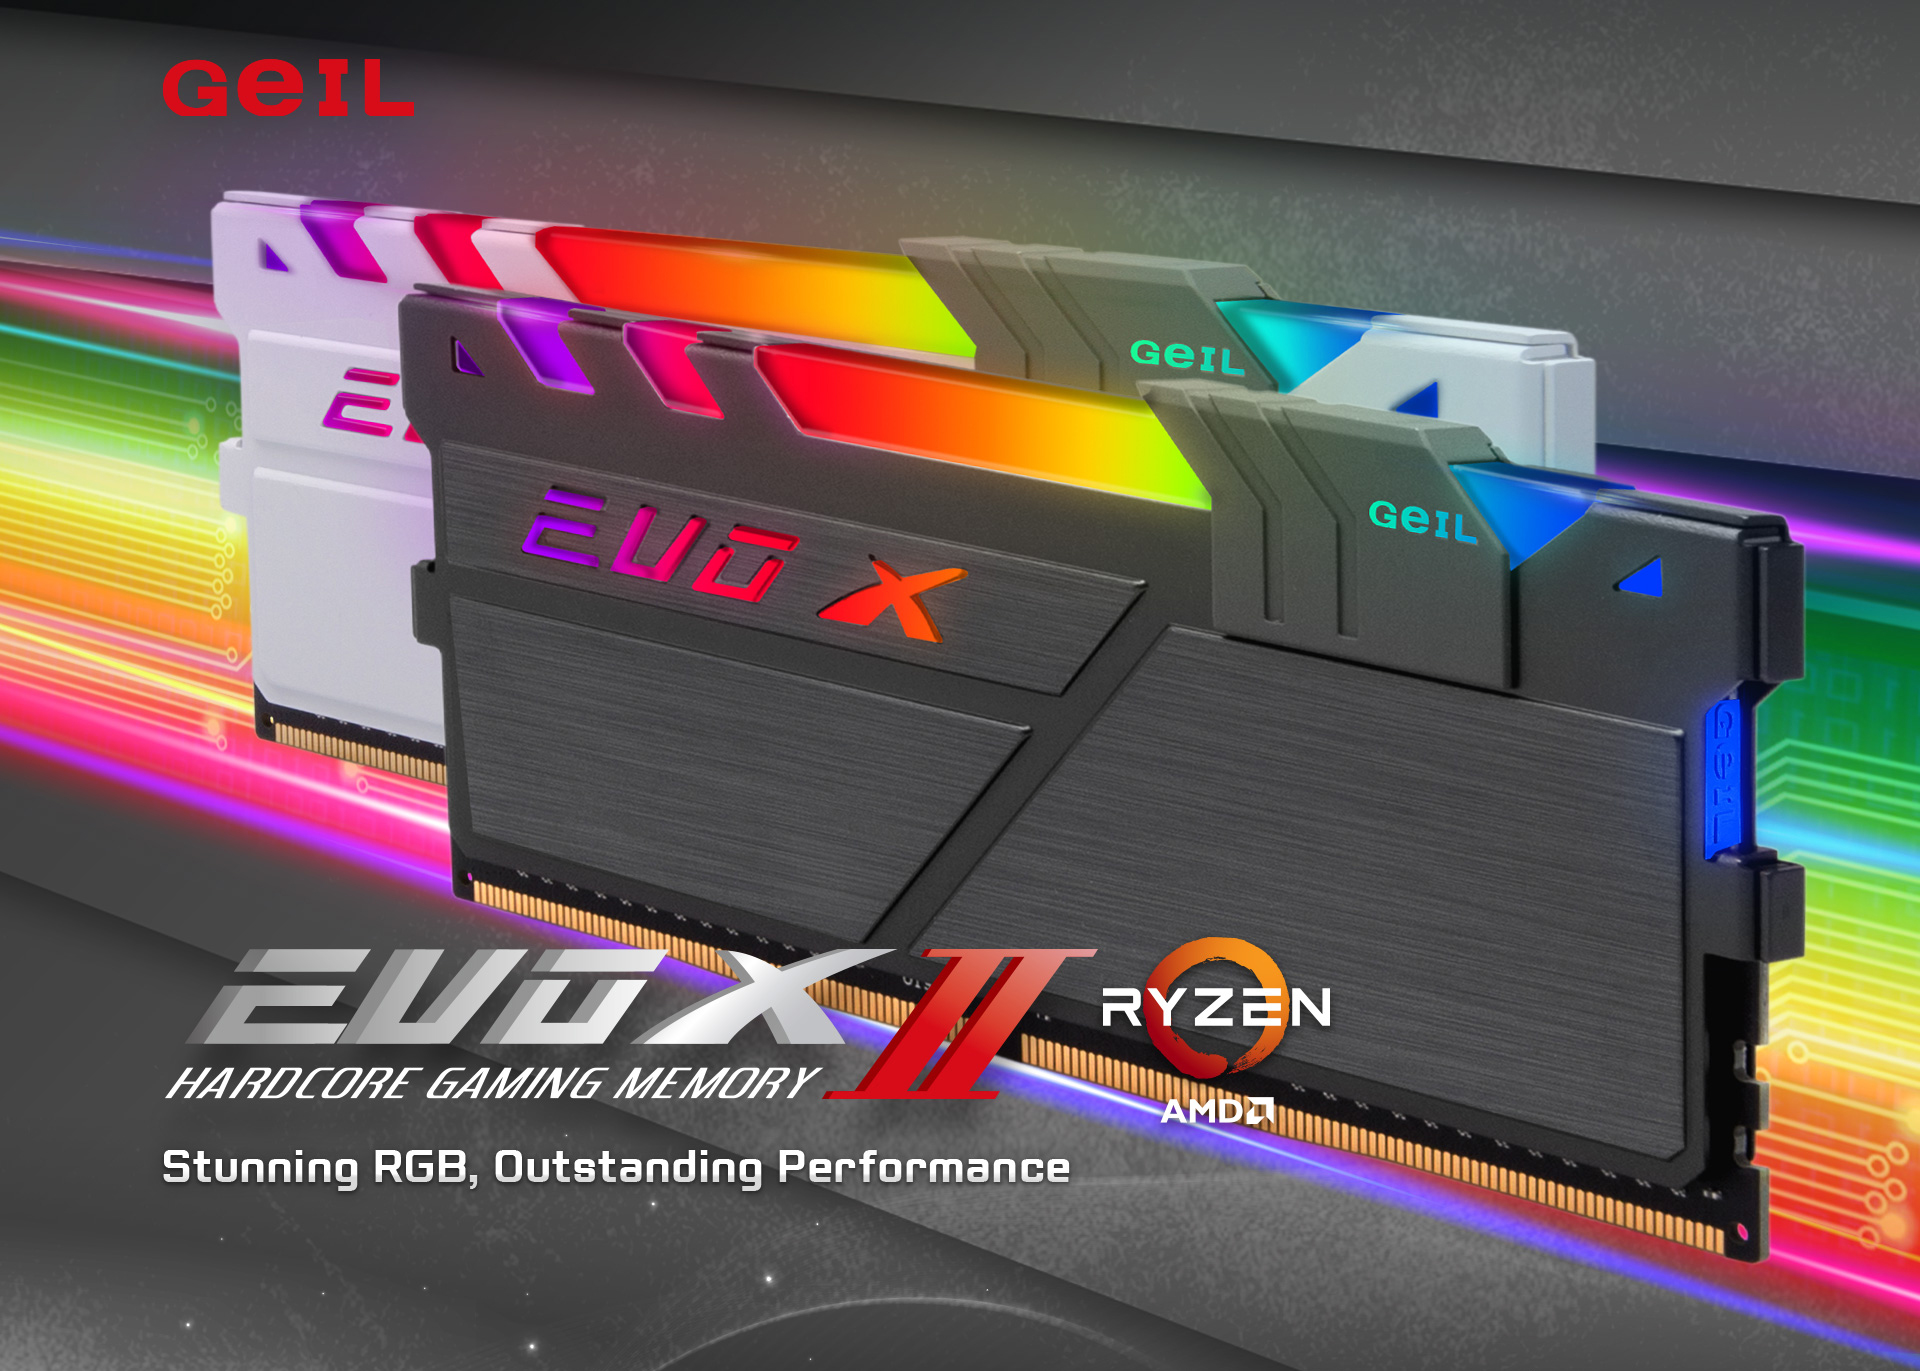 Geil Logo Above Two Geil EVO X Gaming Memory Stick, One White the Other Black, both facing up, angled to the left with rainbow-colored circuitry behind them. There is also text that reads: EVO X II HARDCORE GAMING MEMORY, Stunning RGB, Outstanding Performance - the Ryzen AMD Badges are next to this text